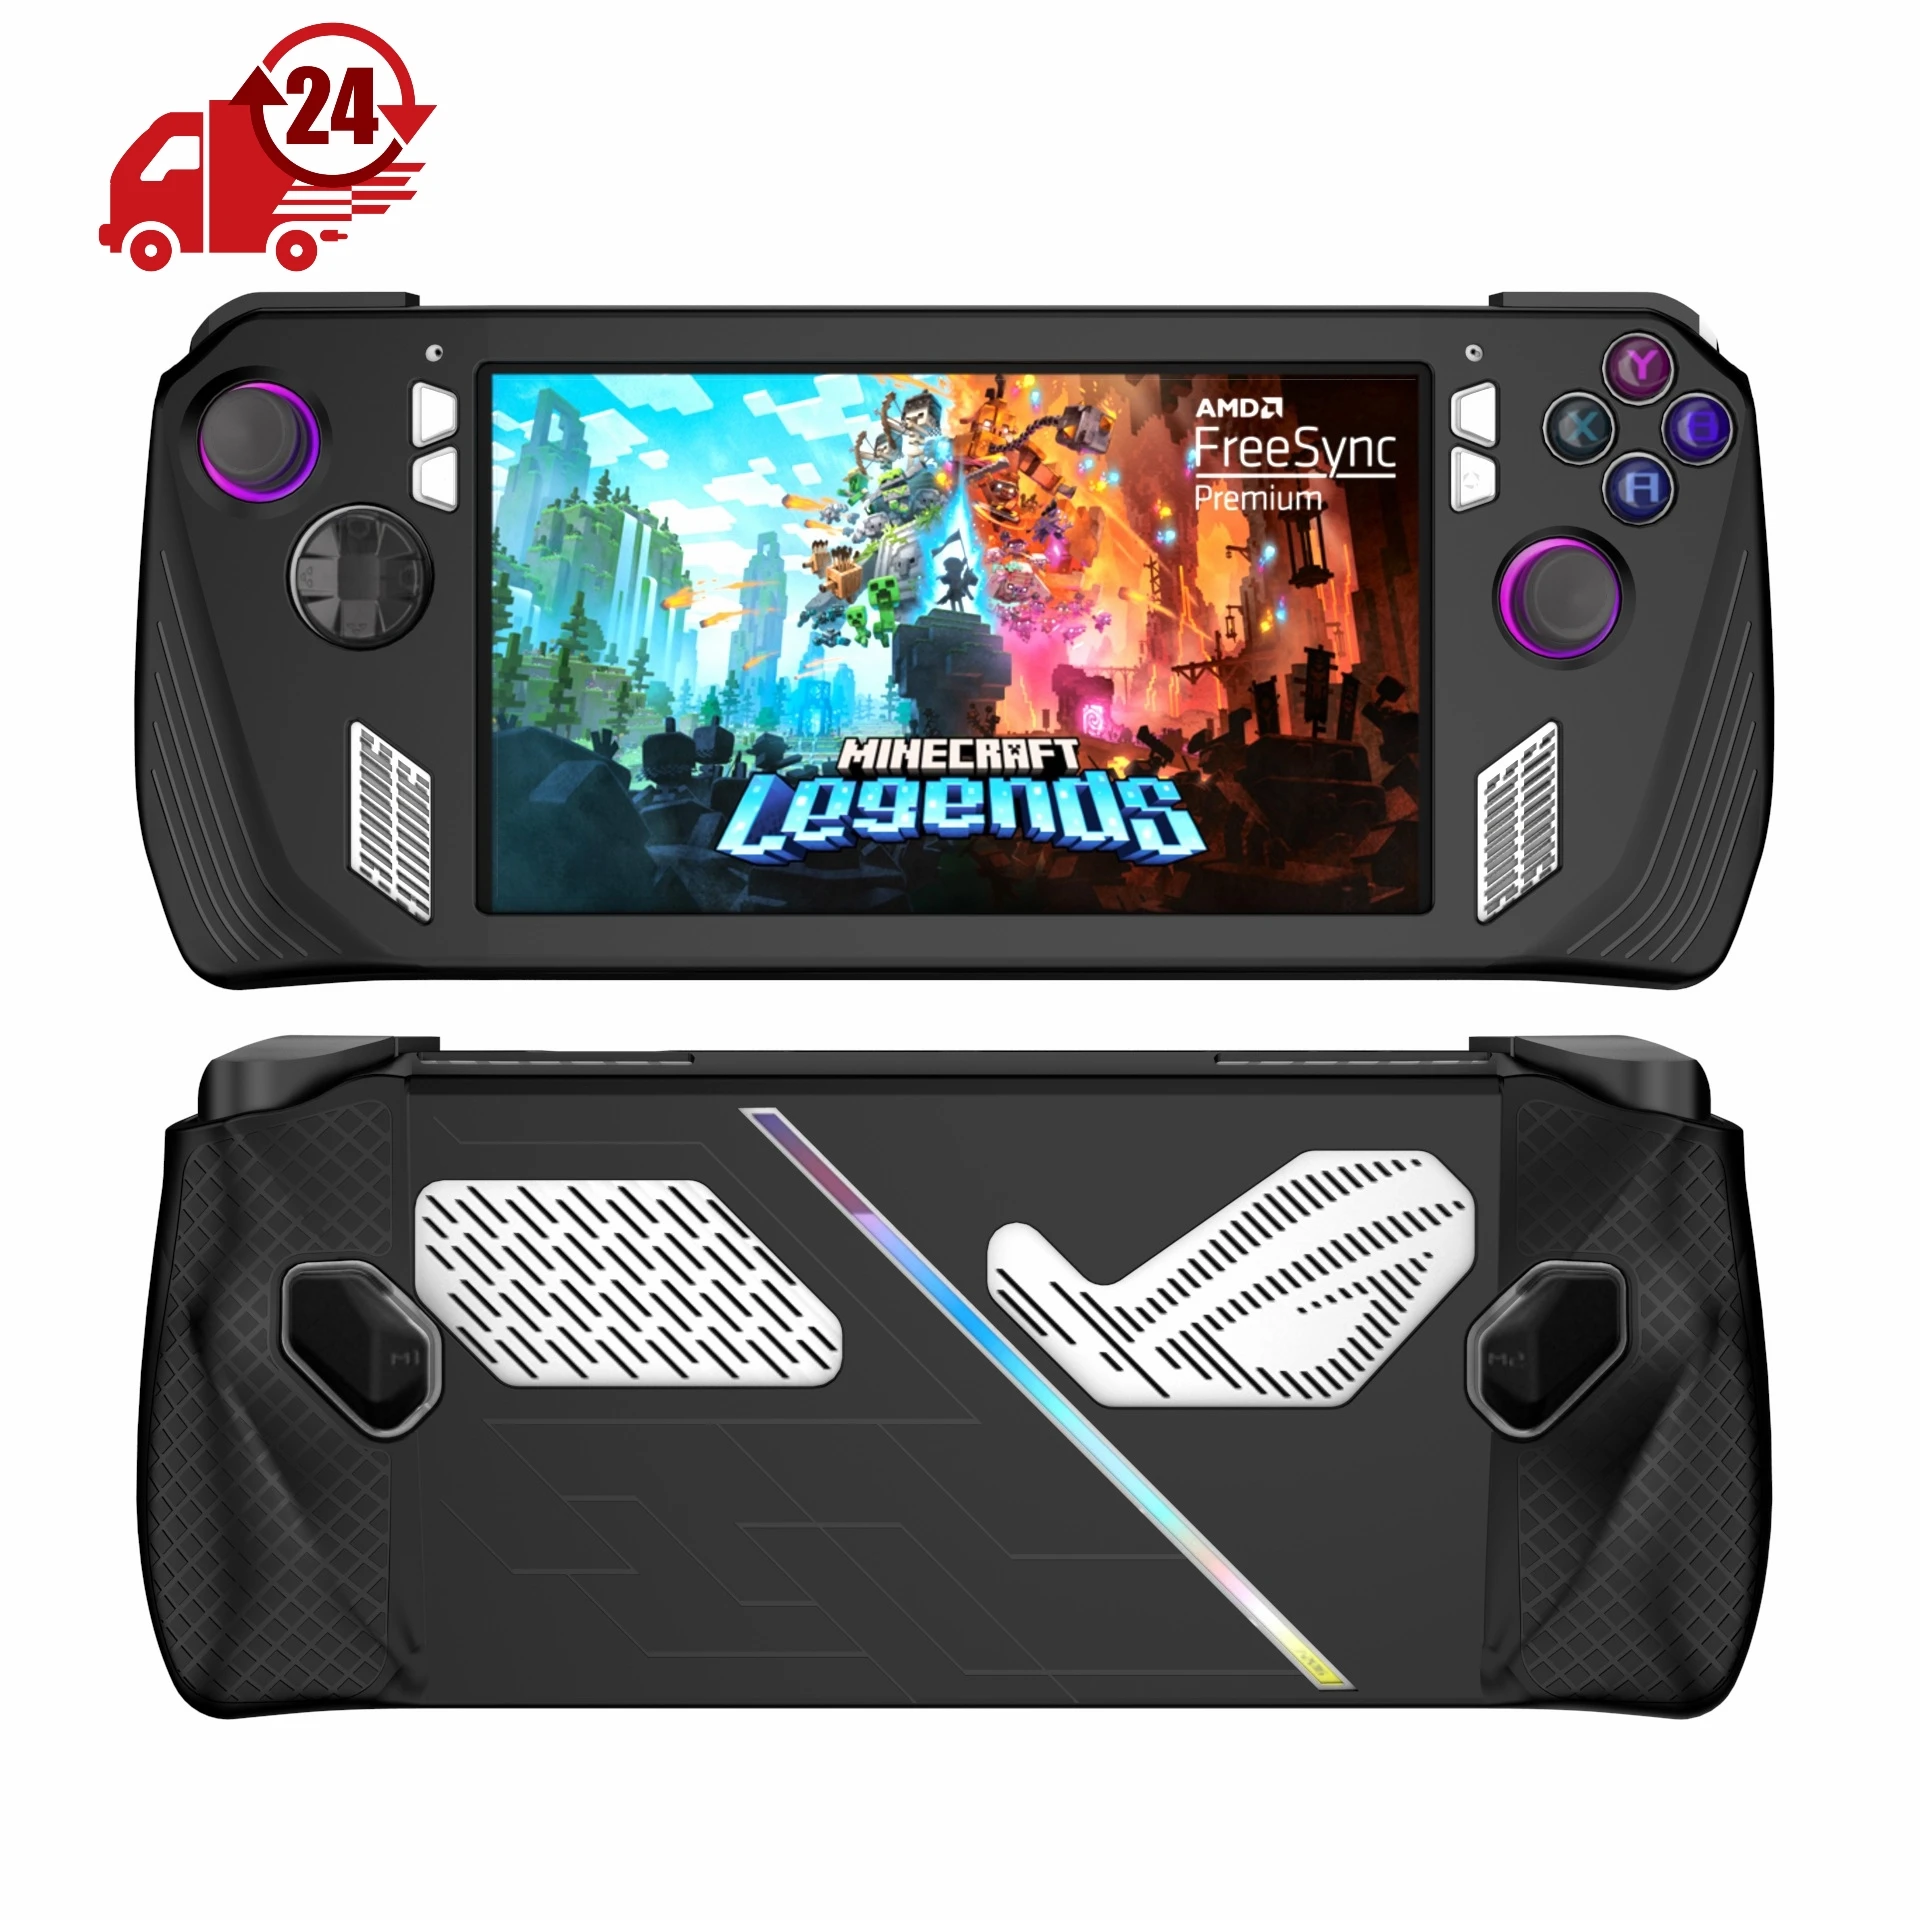 

Silicone Case for ASUS ROG Ally Gamings Handheld, Soft Silicone Protective Skin Sleeve for ROG Ally Game Console Silicone Cover